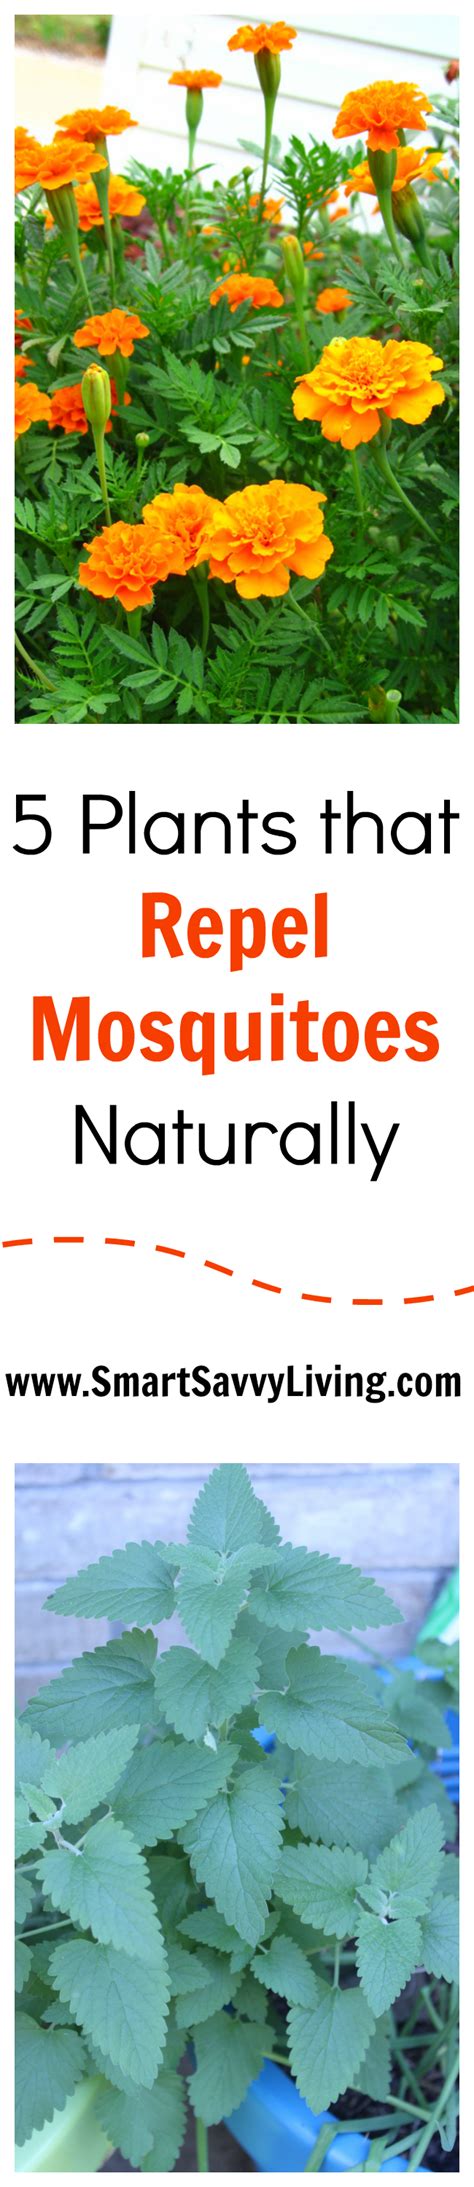 5 Plants That Help Repel Mosquitoes Naturally Mosquito Repelling